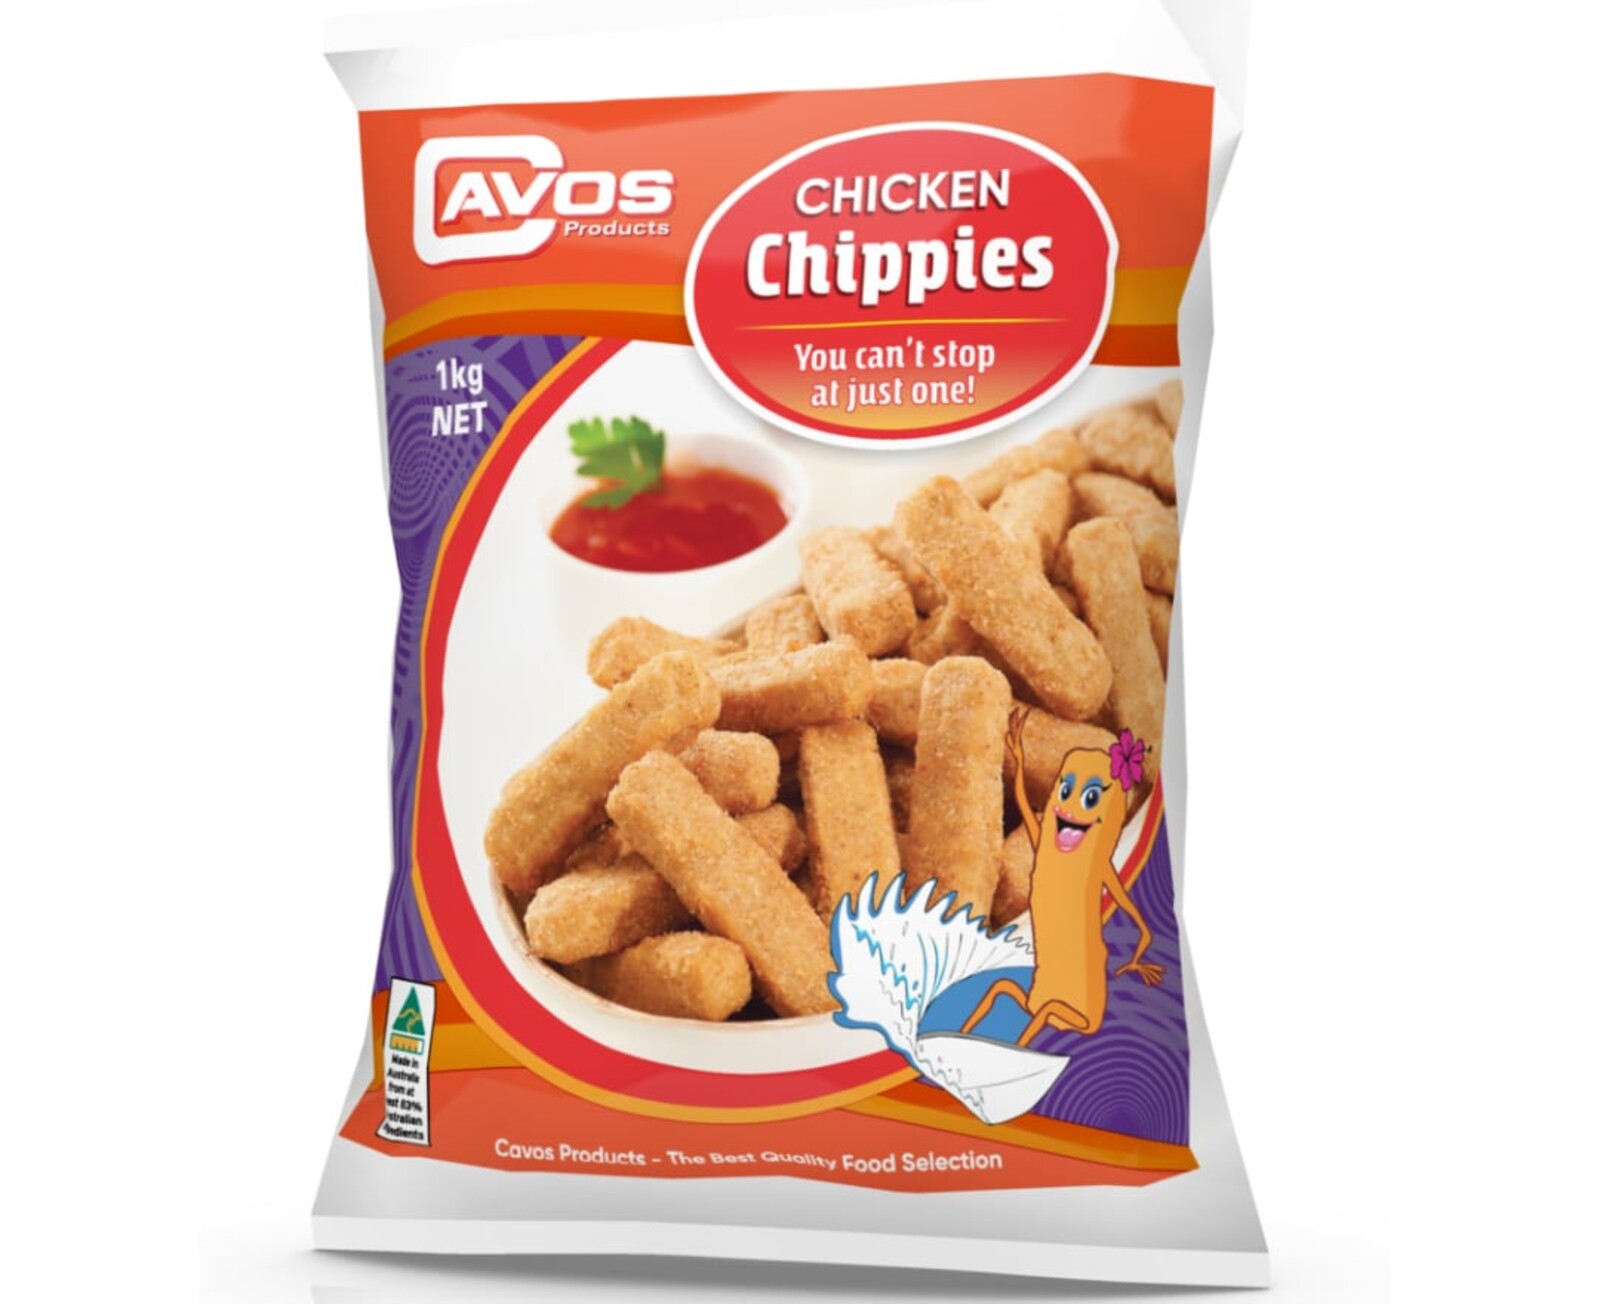 Cavos Products Chicken Chippies